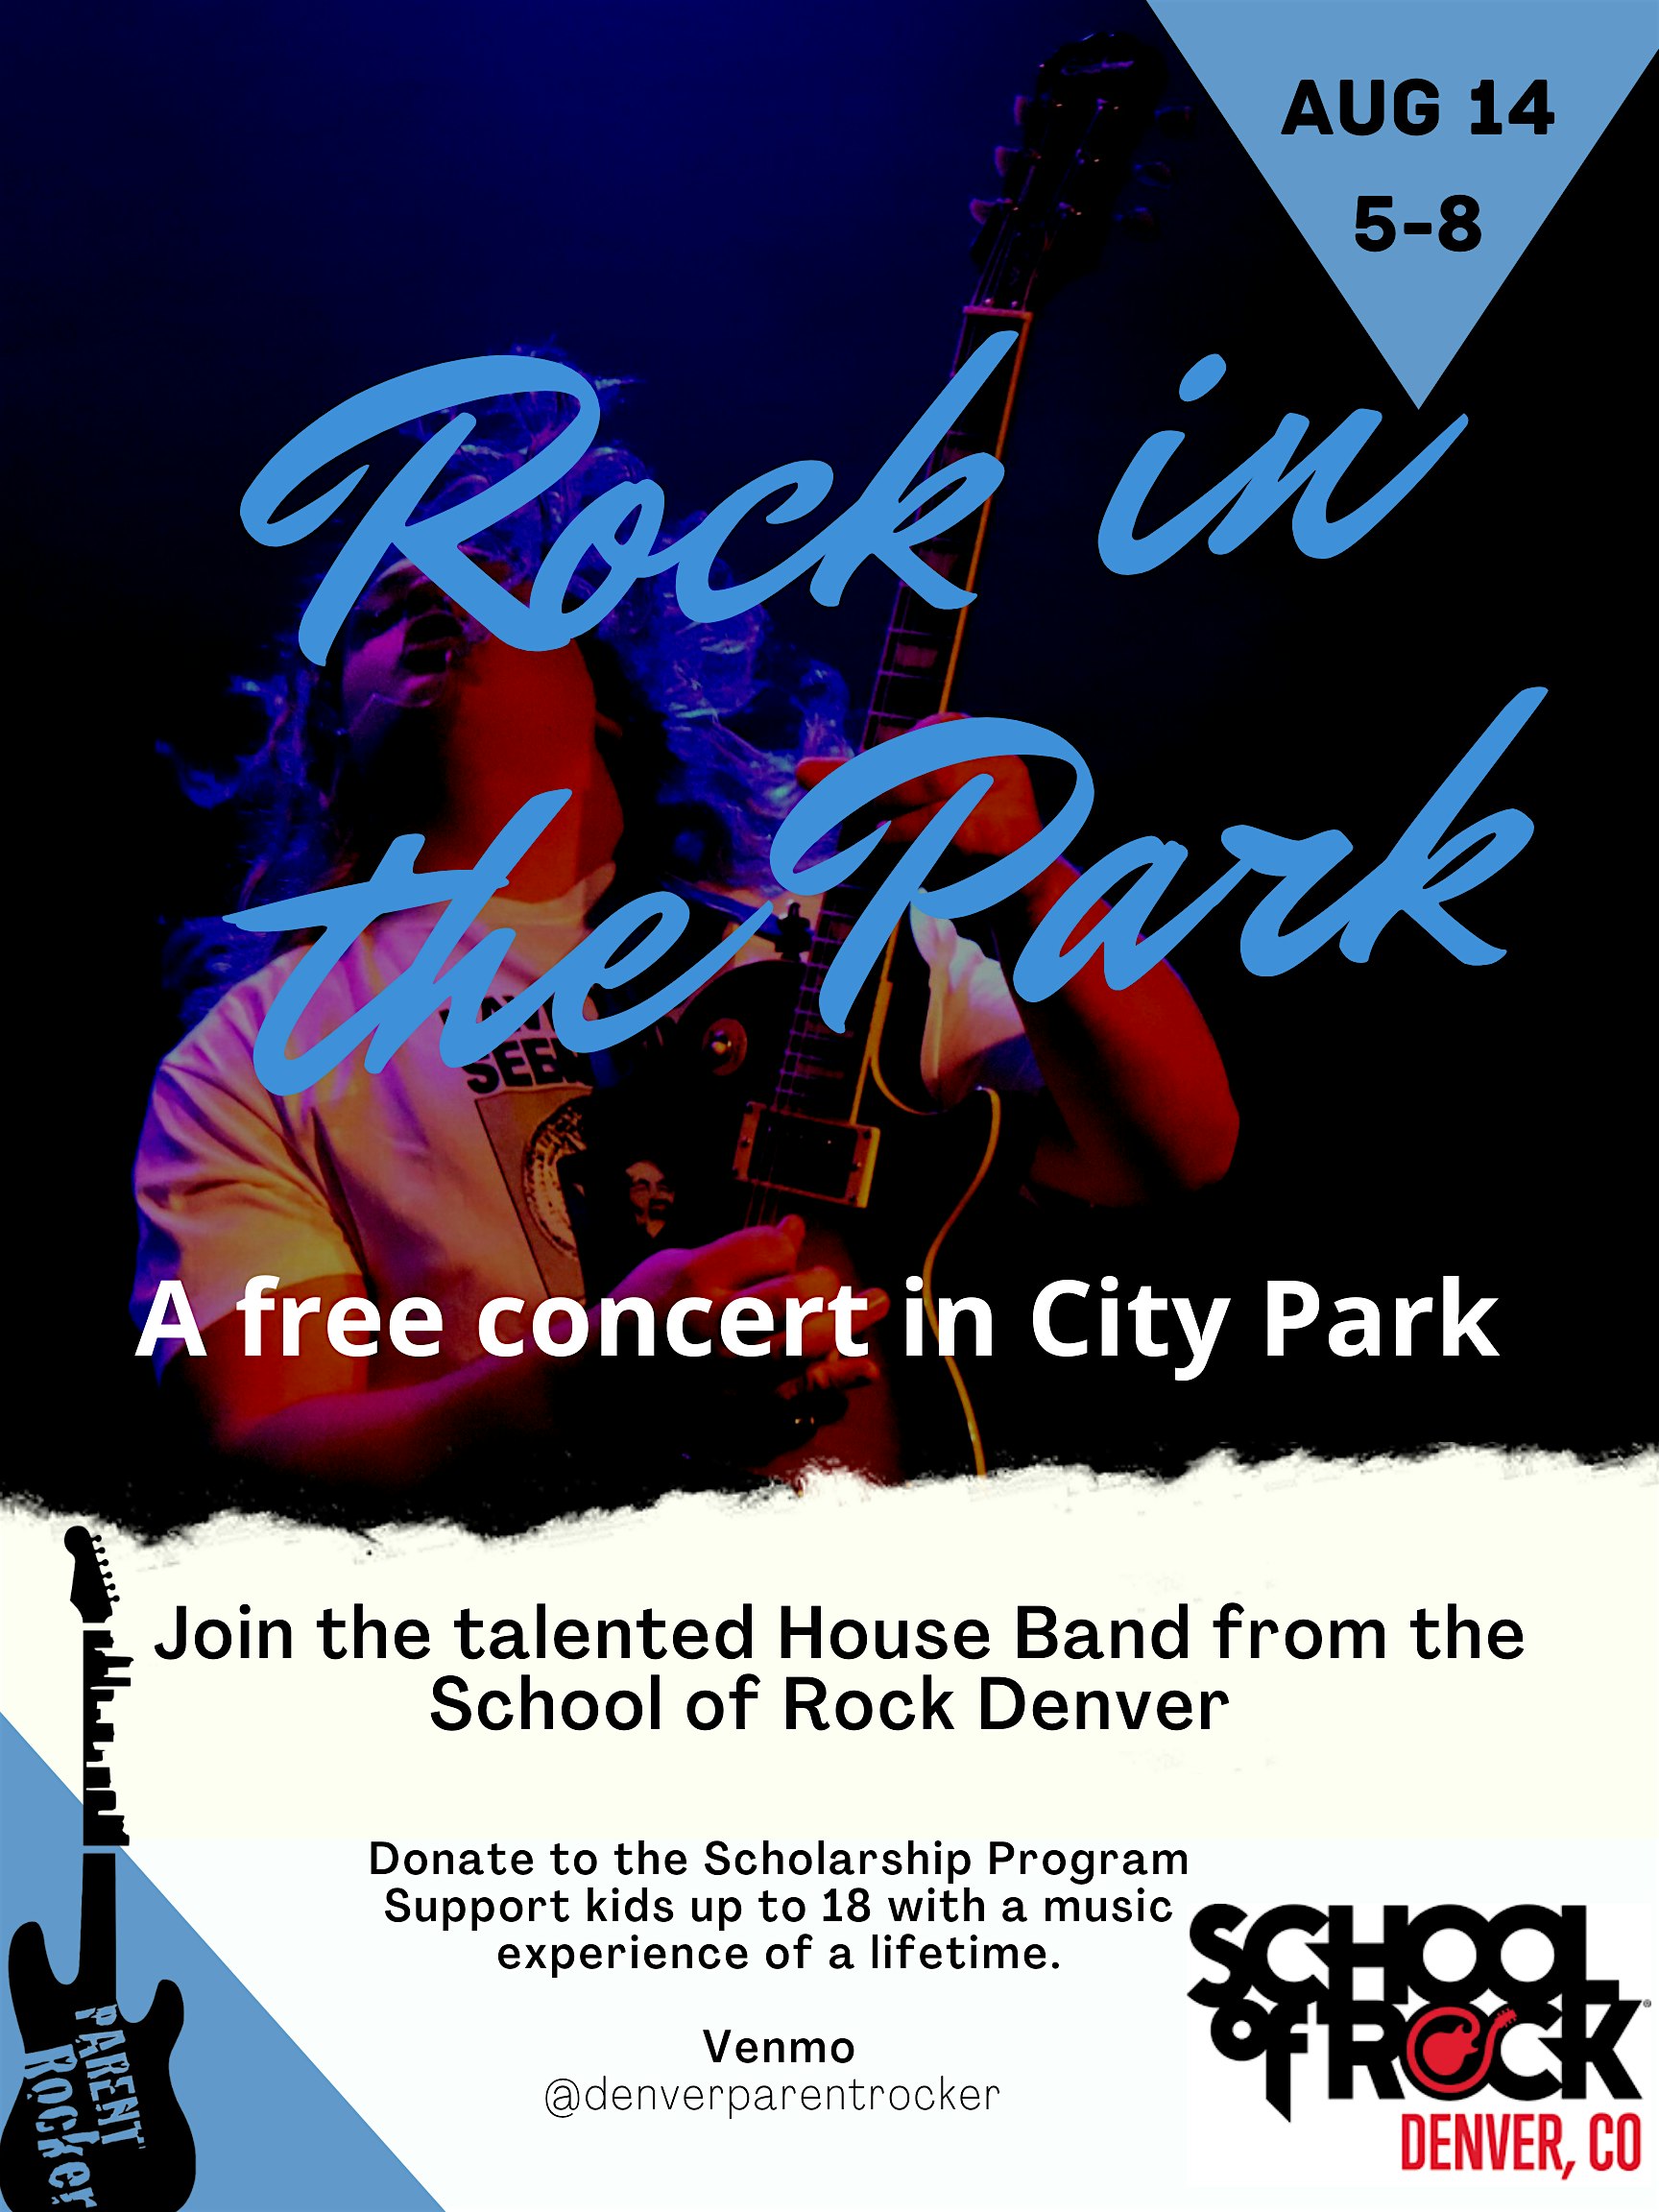 2nd Annual "Rock in the Park" Concert in City Park